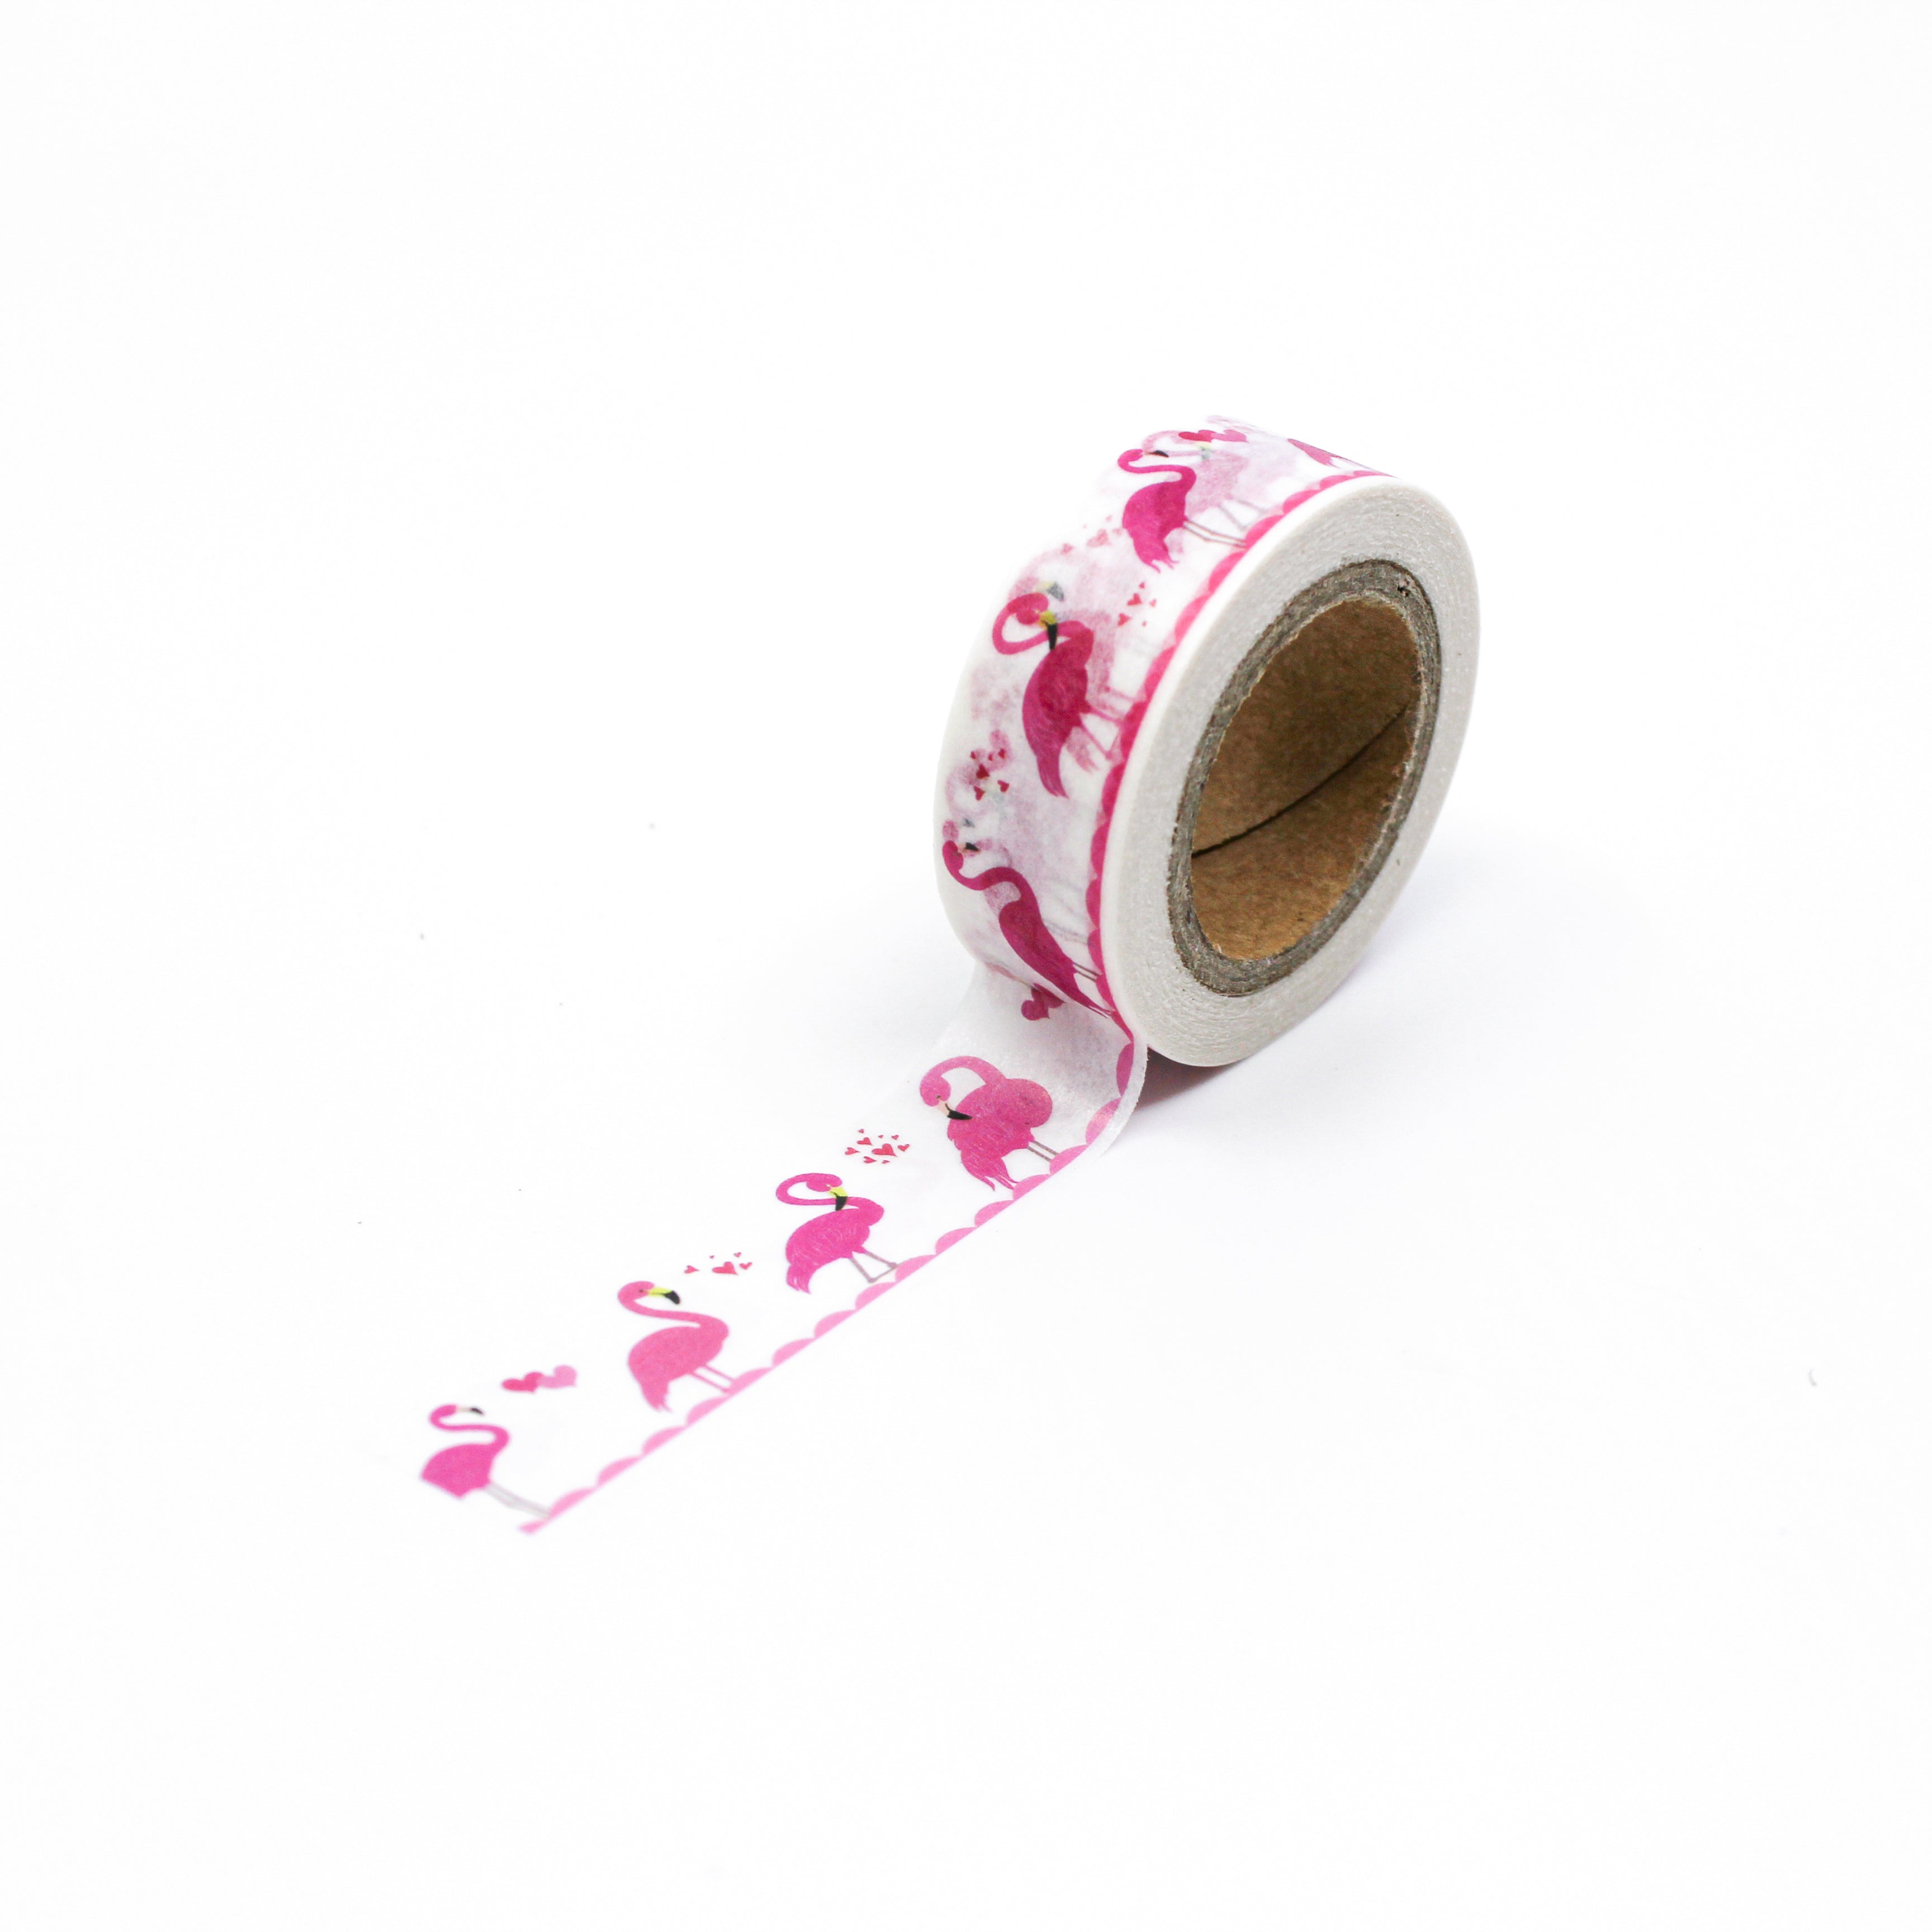 This is a full pattern repeat view of cute pink flamingo washi tape from BBB Supplies Craft Shop